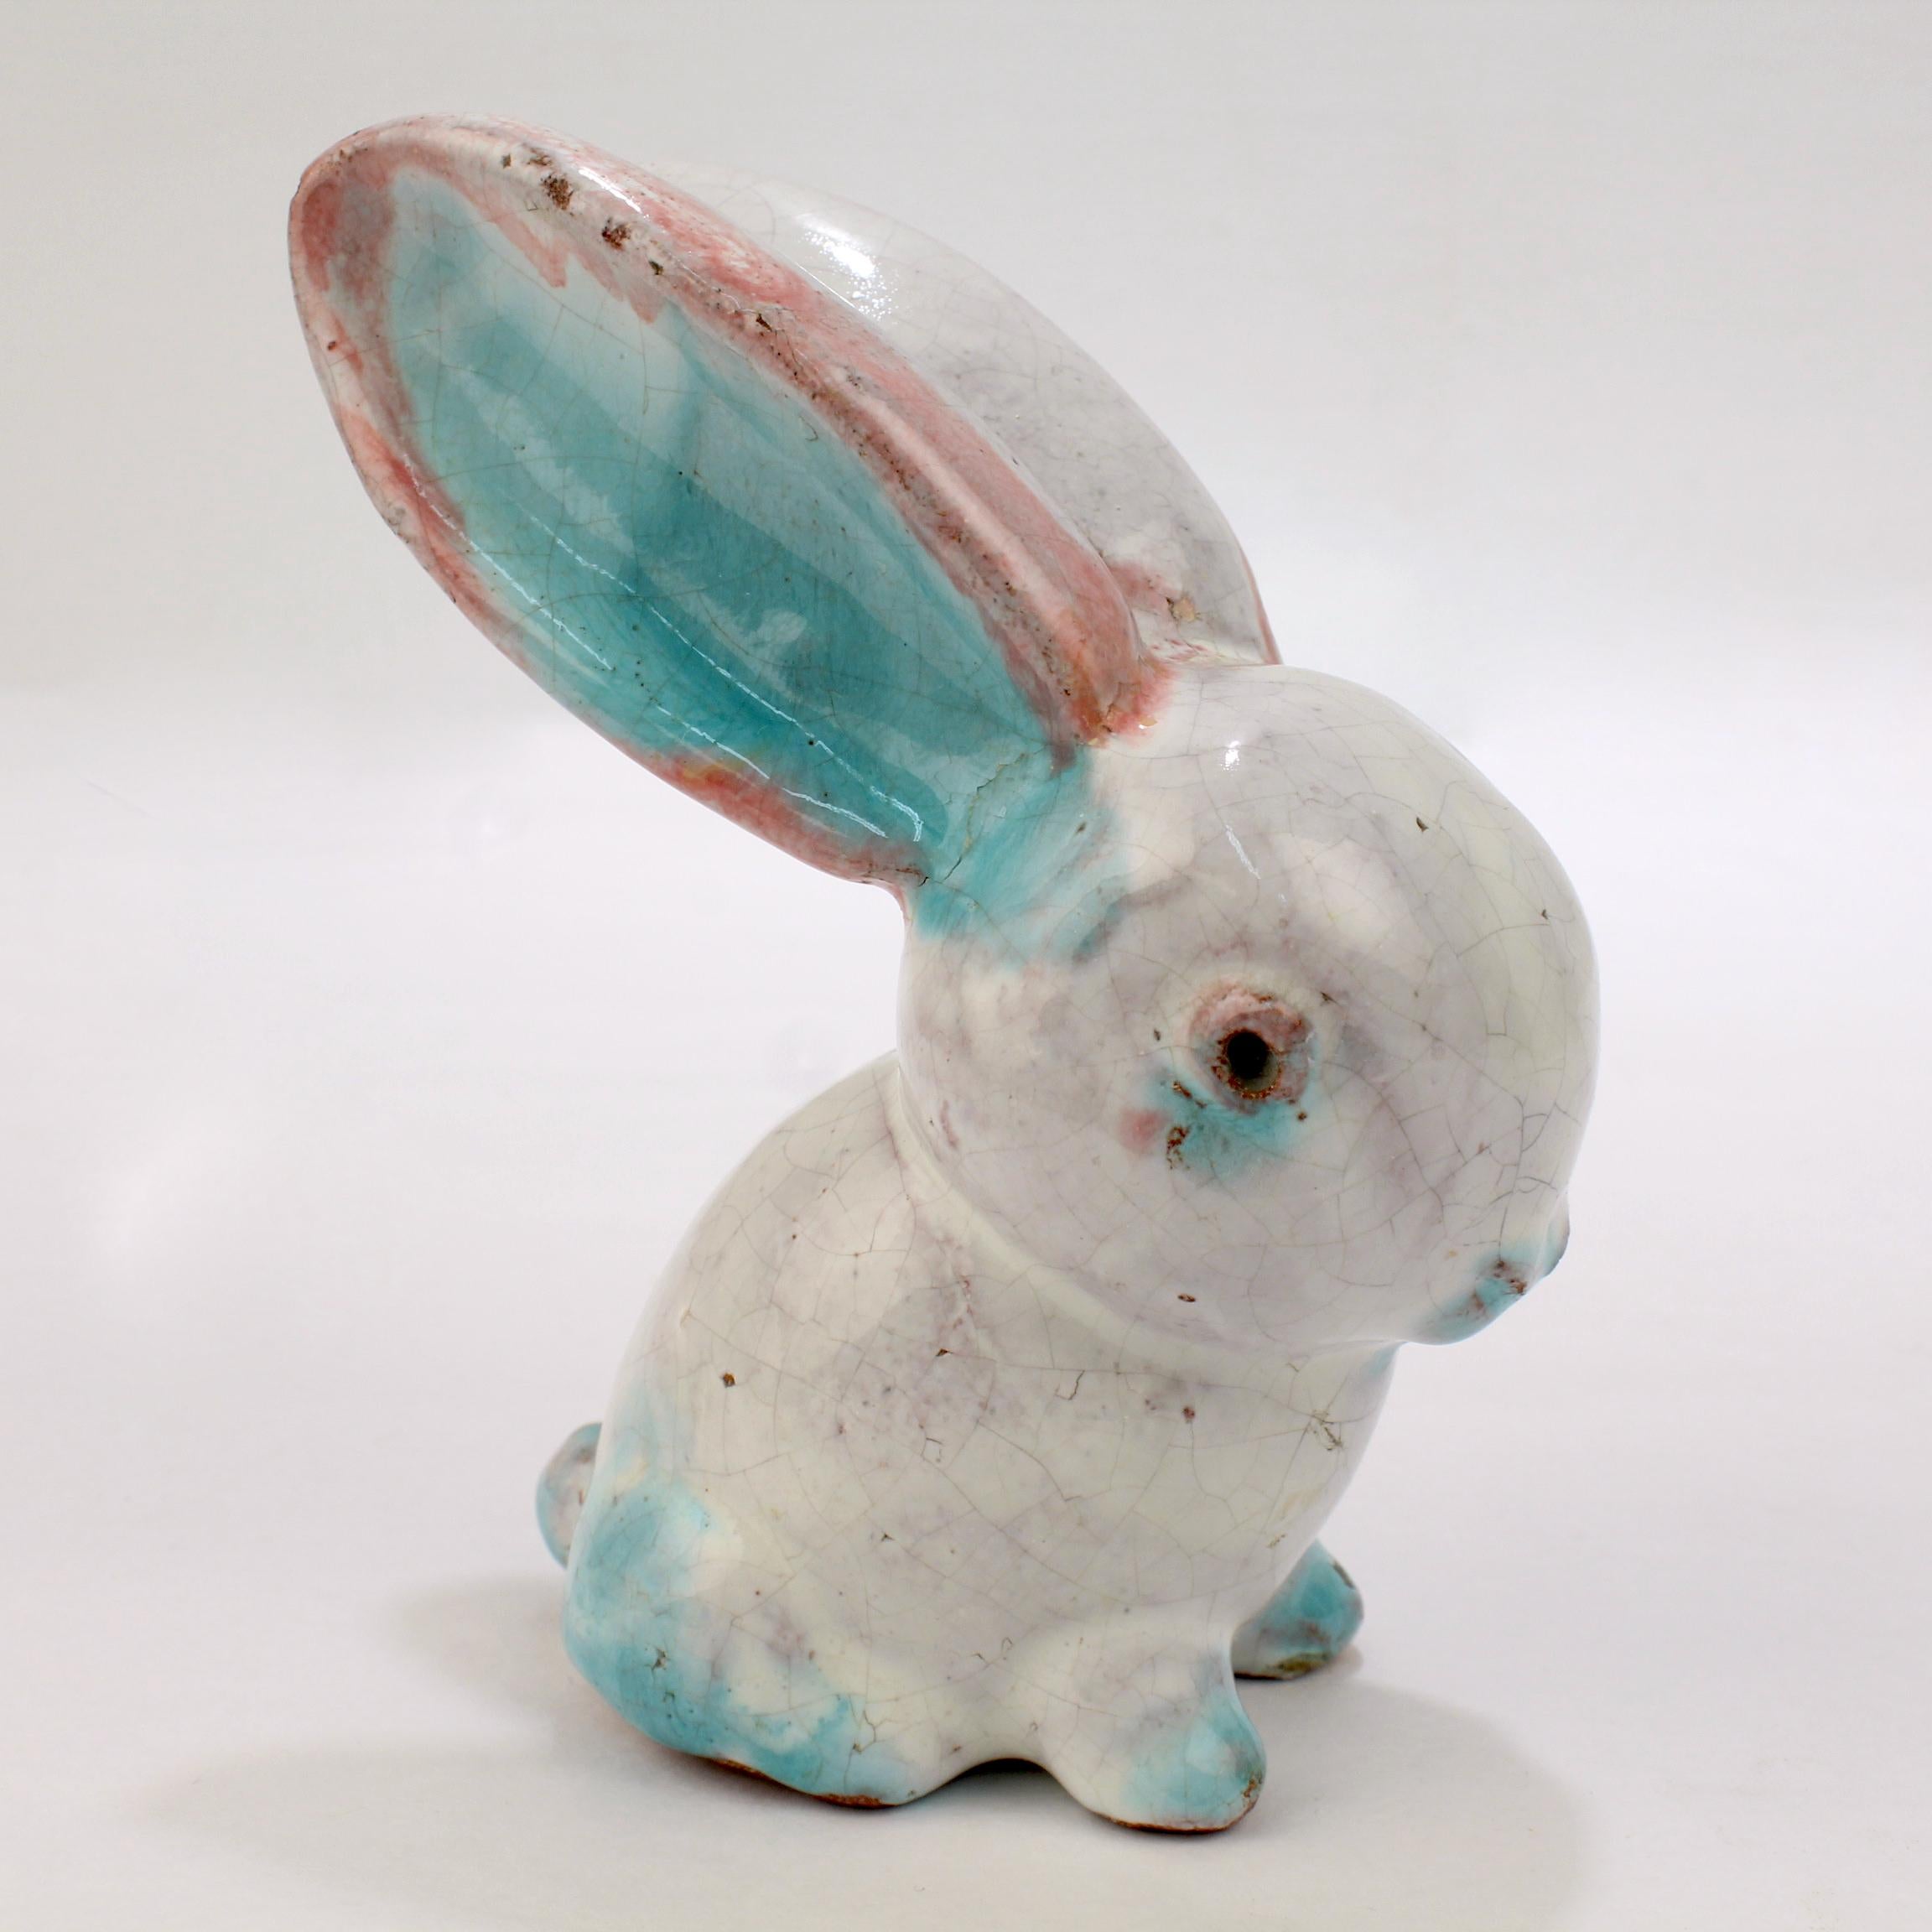 An antique Austrian Kuftstein tin-glazed terracotta pottery figurine of a rabbit.

Modeled by Walter Bosse.

In the Wiener Werkstätte style.

Simply a wonderful figurine!

Date:
Early 20th century

Overall condition:
It is in overall